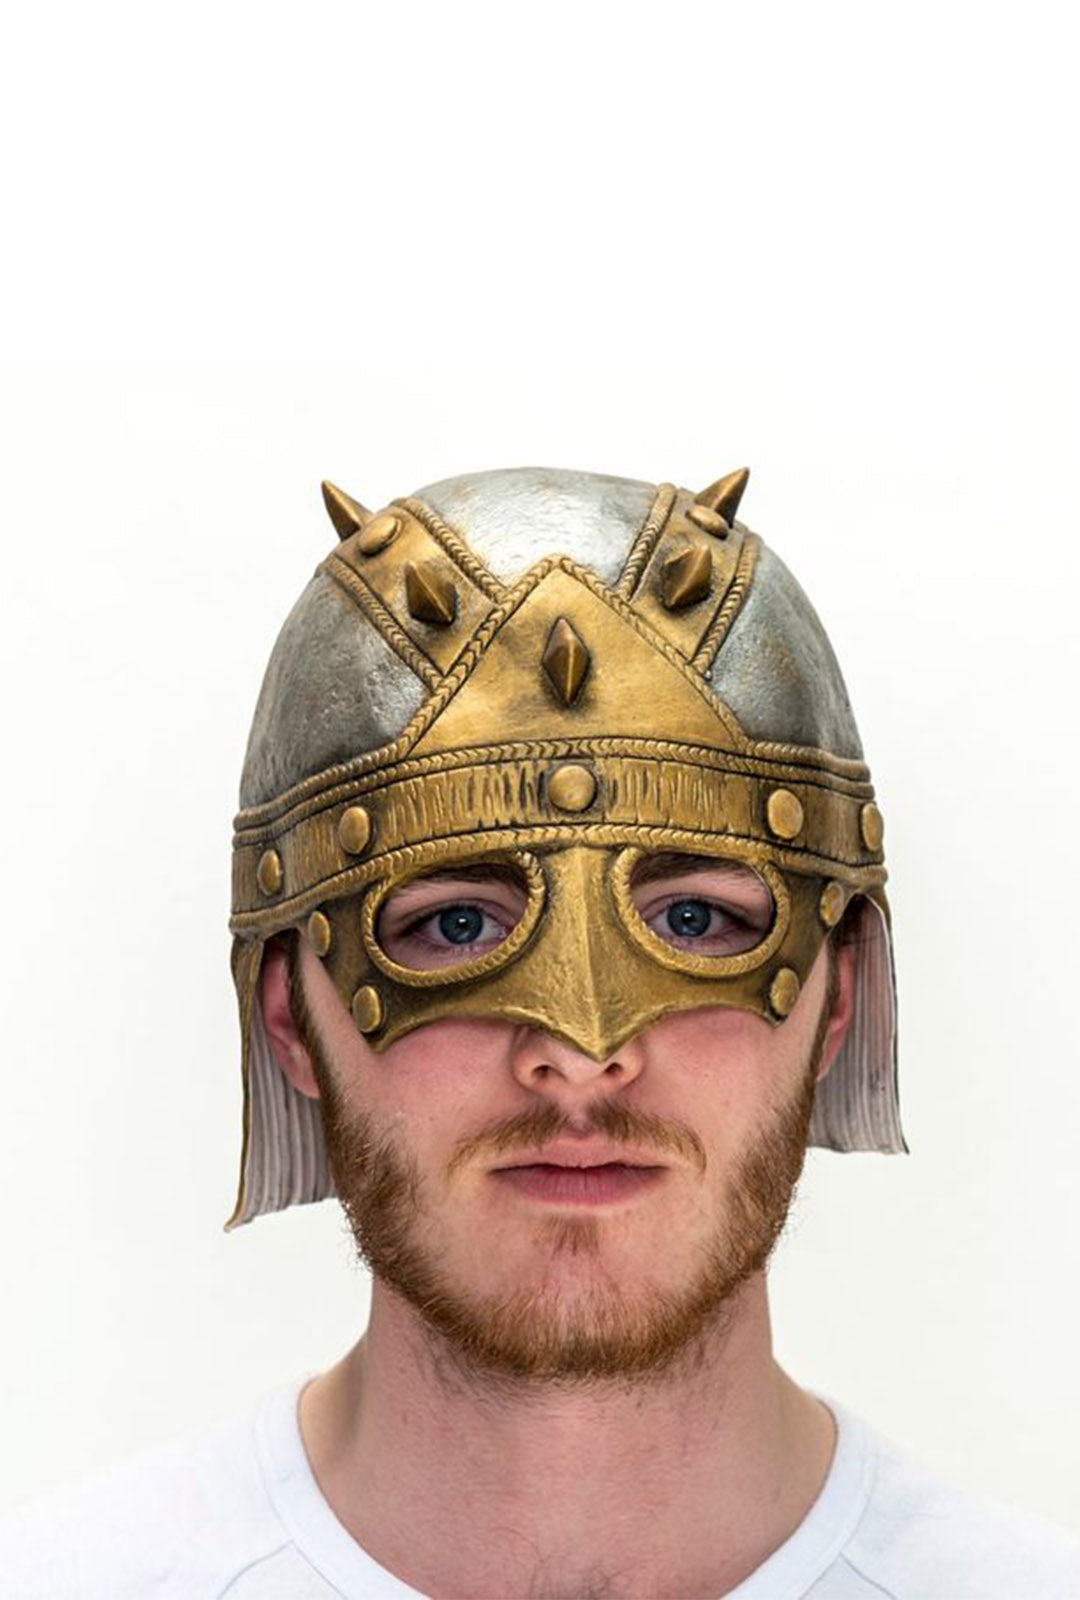 Gold and Silver Gladiator Mask Helmet